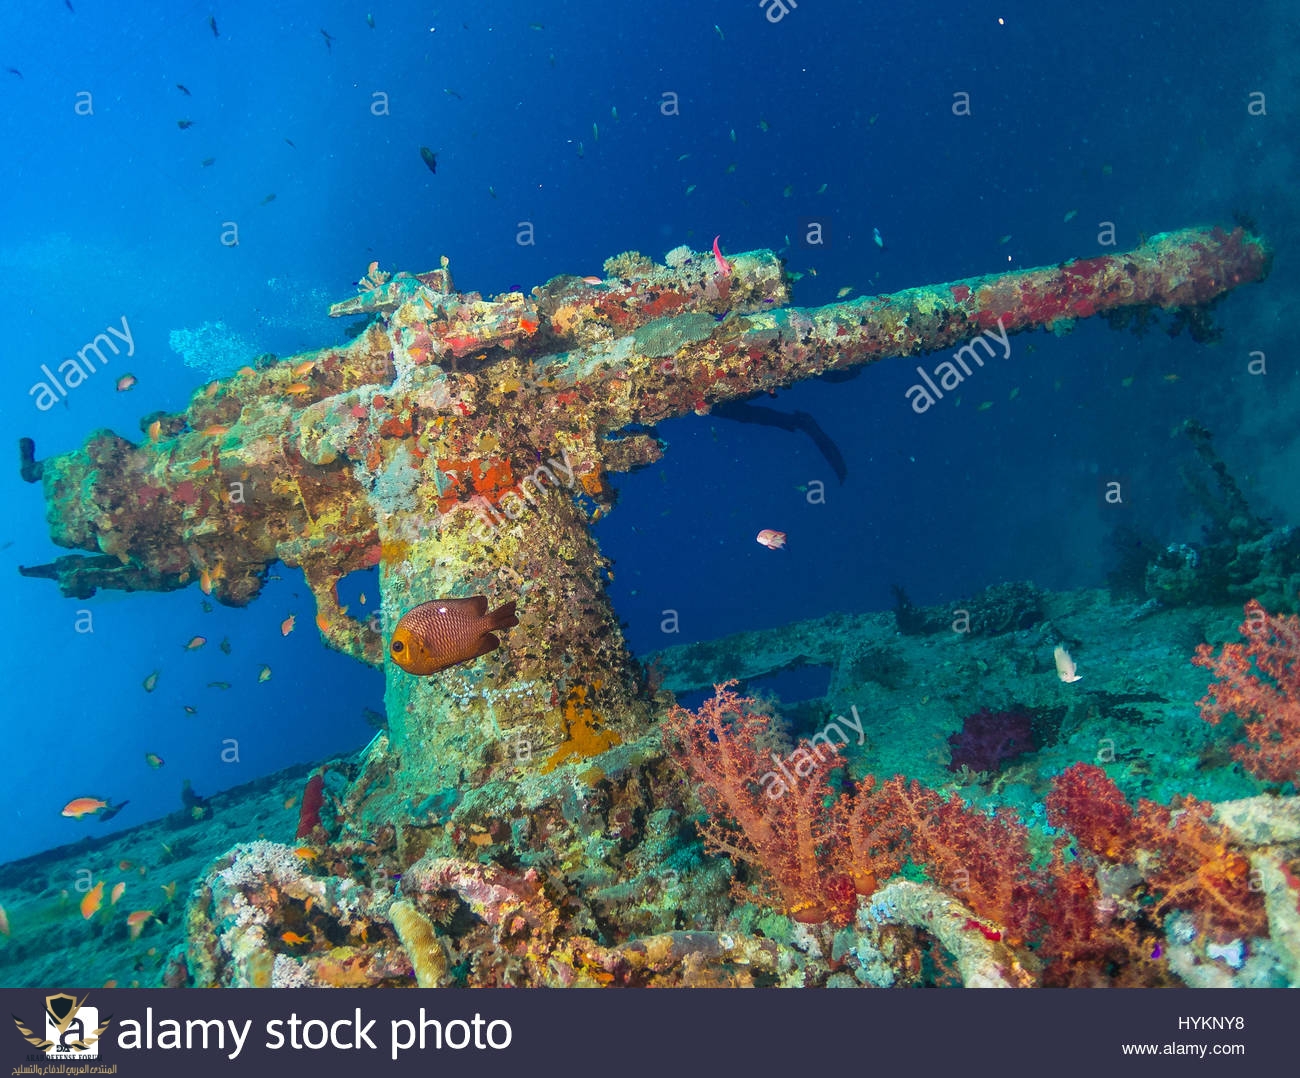 red-sea-egypt-picture-of-a-mounted-gun-incredible-images-show-vehicles-HYKNY8.jpg